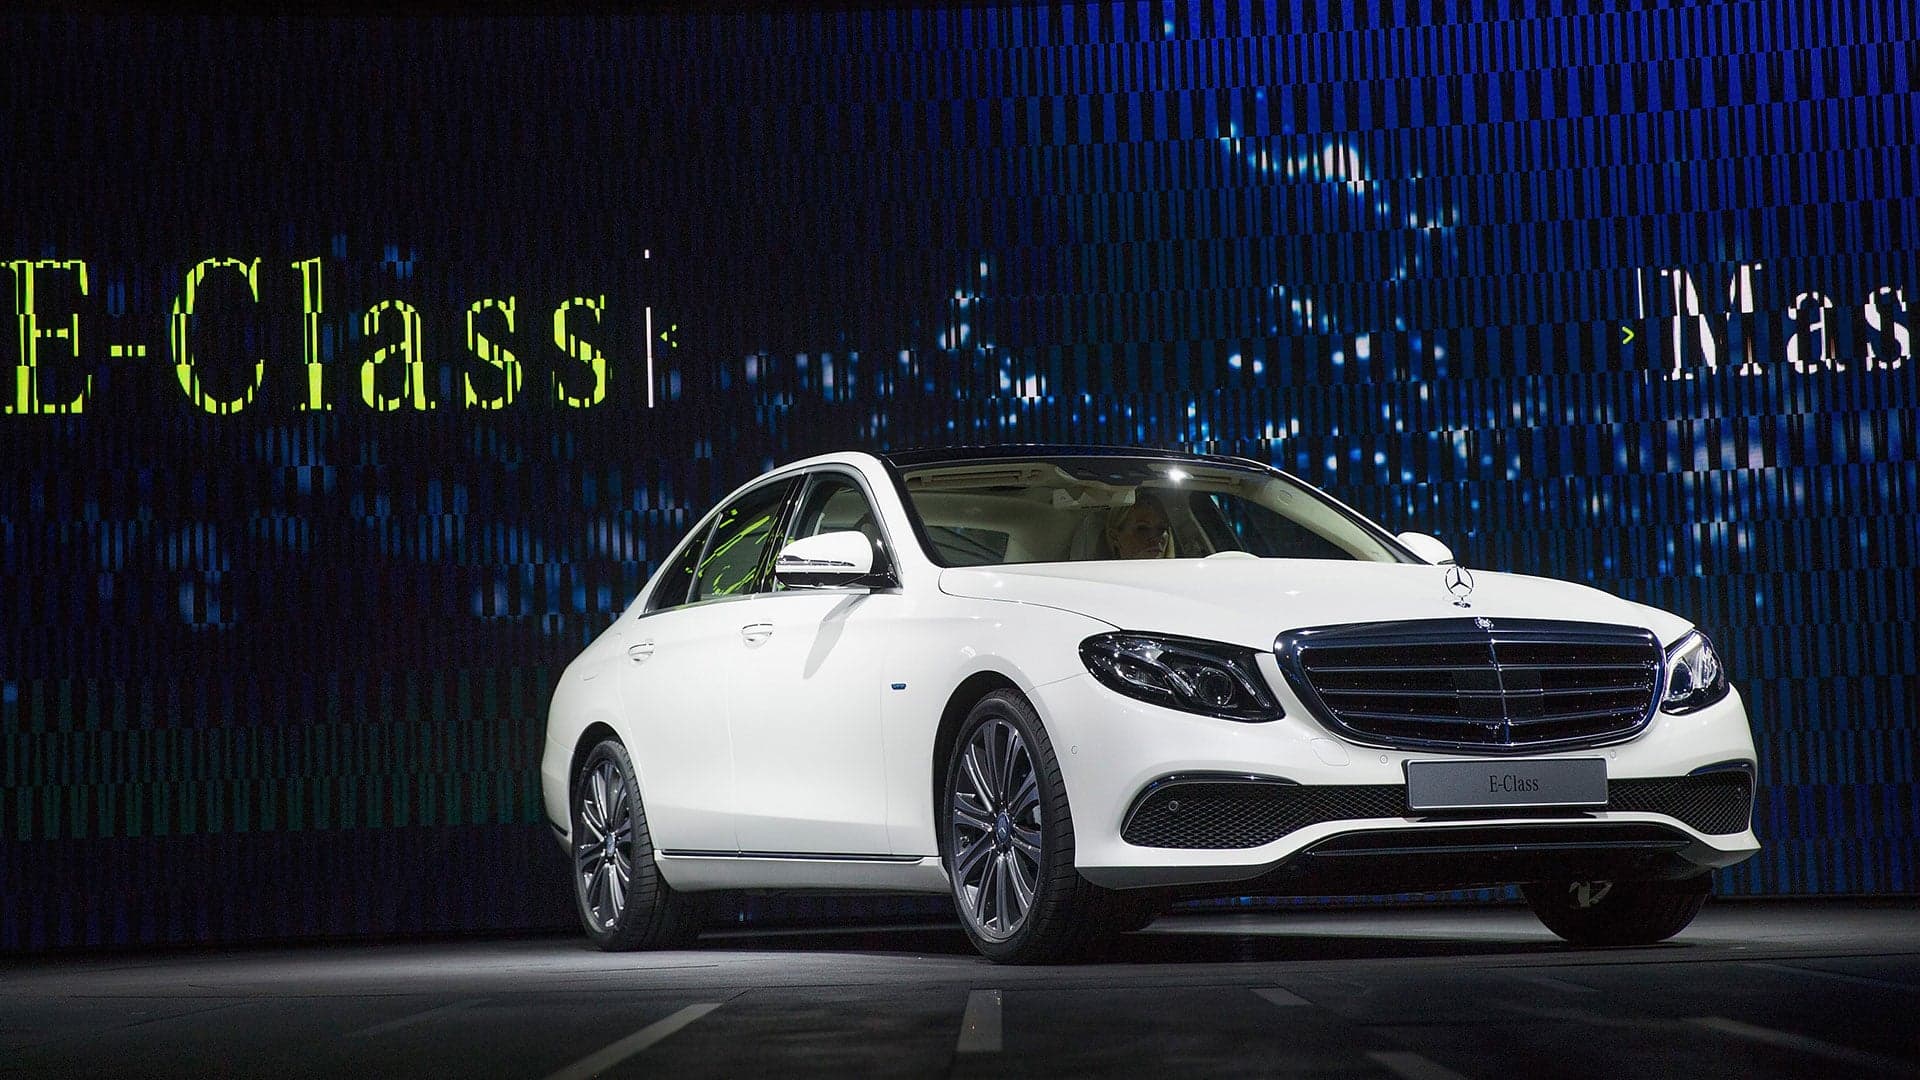 The New Mercedes-Benz E-Class Will Control Your Mind